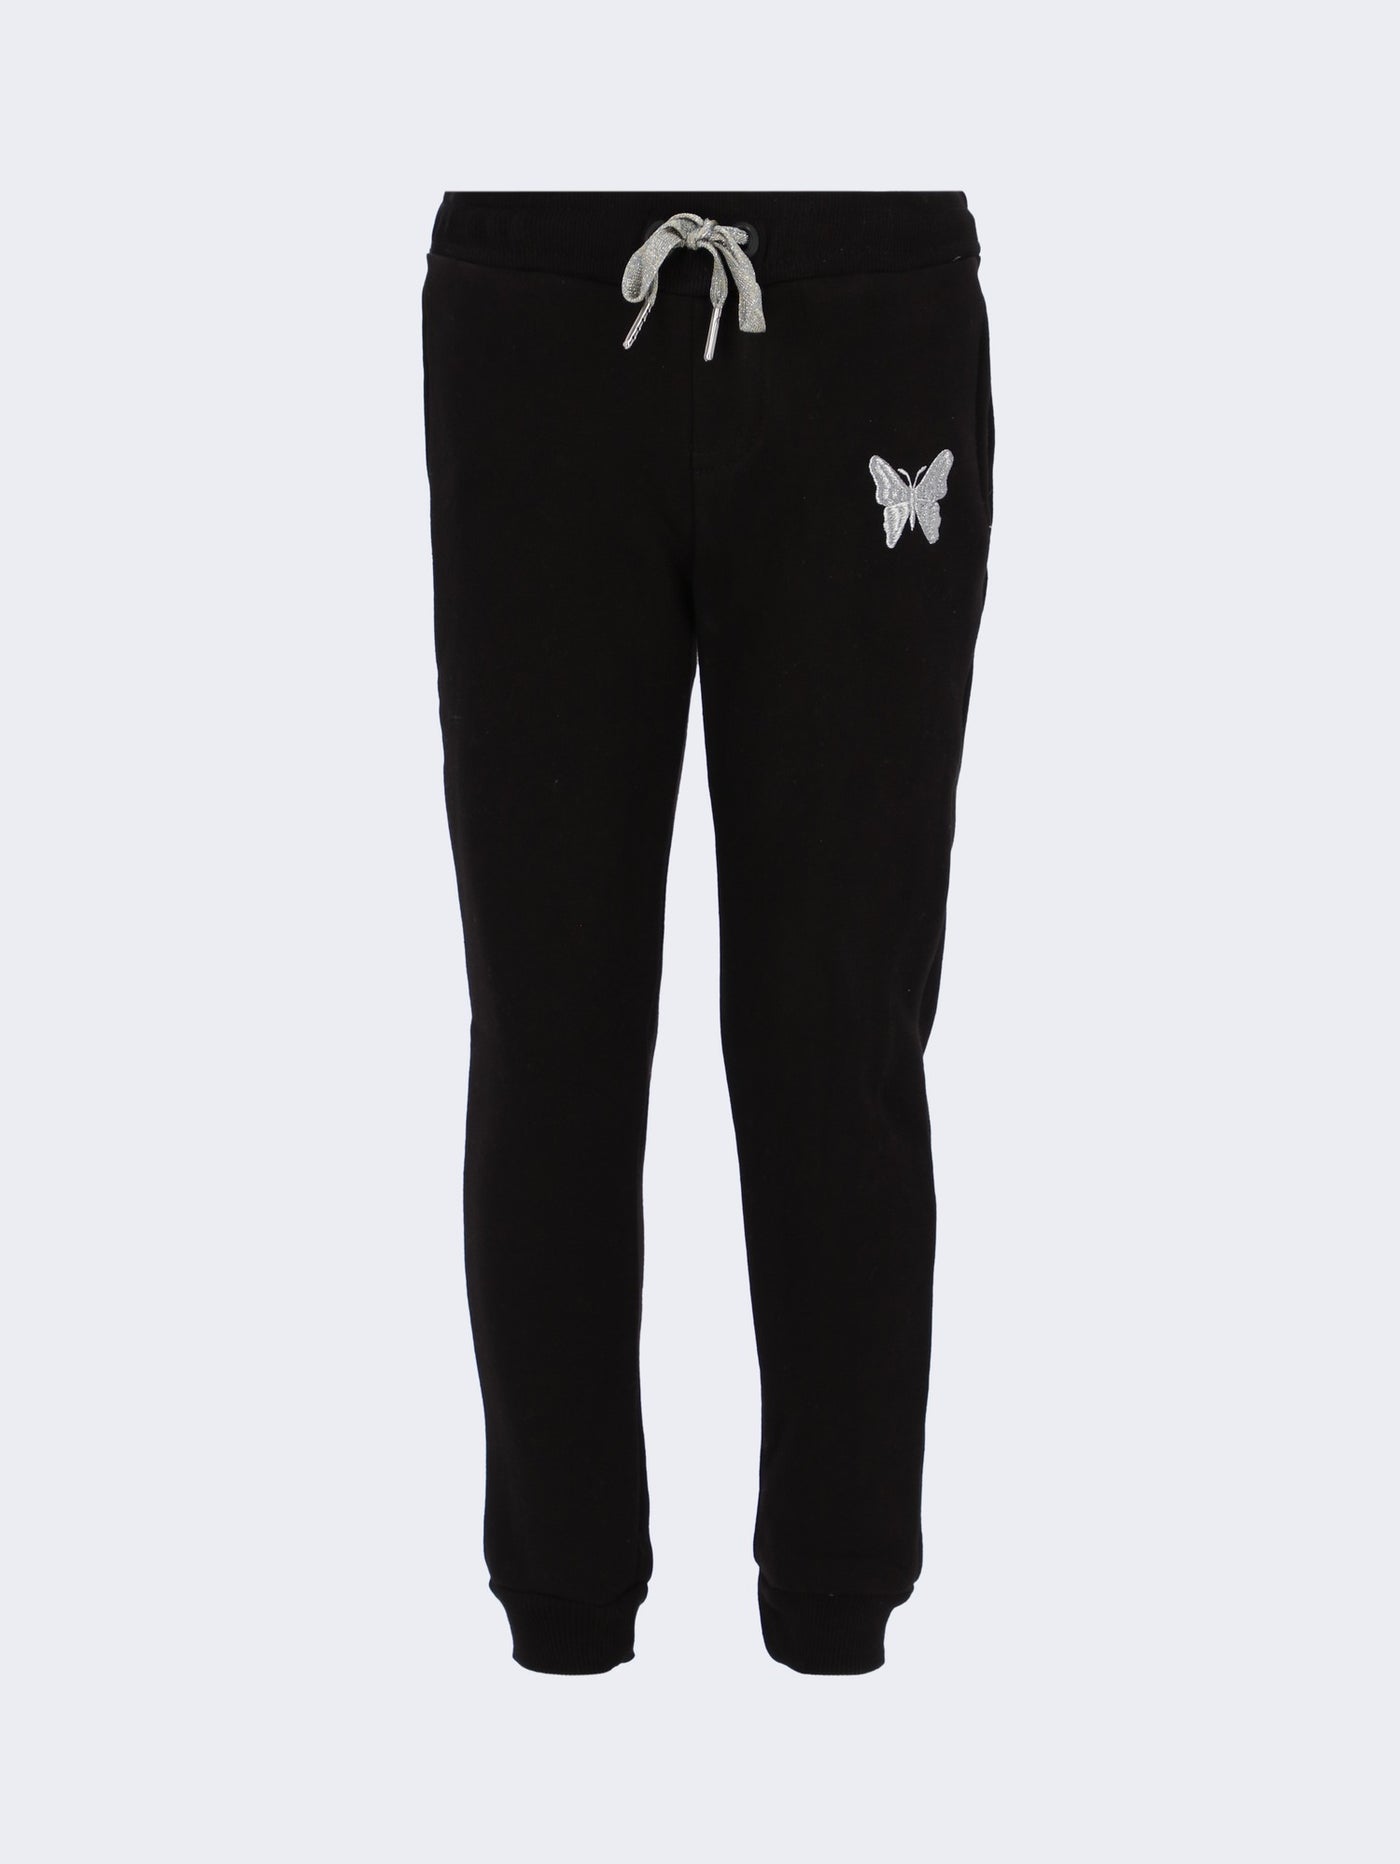 Kids Girls Sweatpants with Front Side Embroidery Butterfly